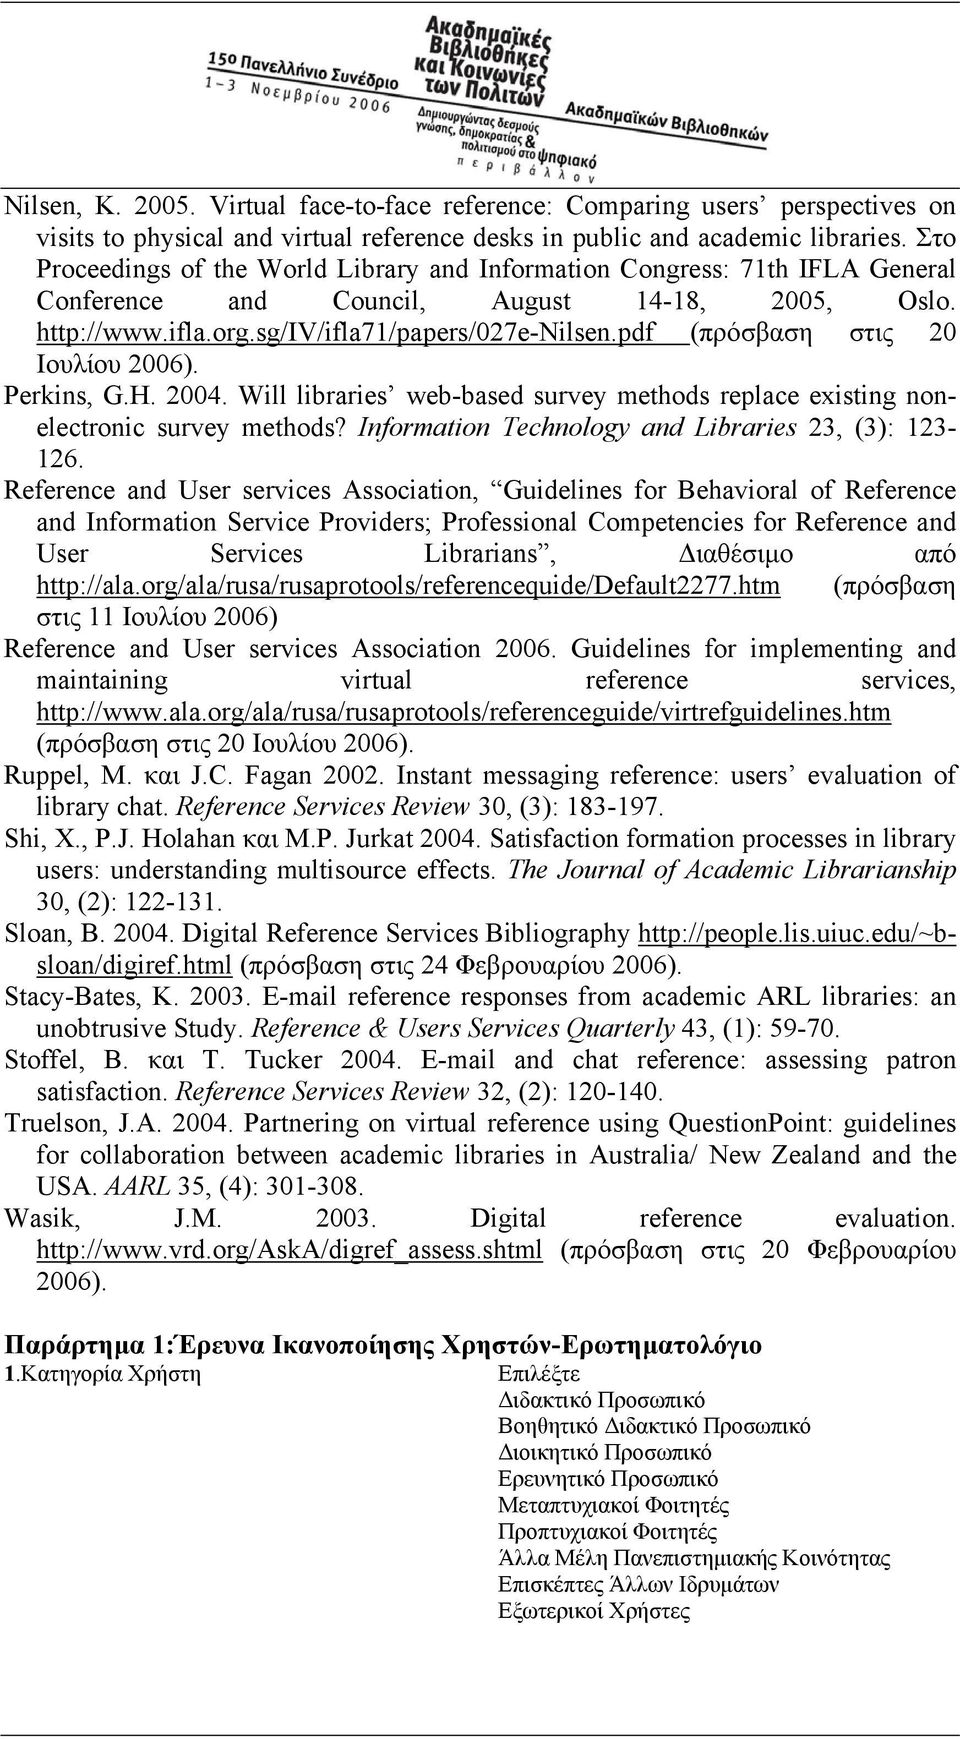 pdf (πρόσβαση στις 20 Ιουλίου 2006). Perkins, G.H. 2004. Will libraries web-based survey methods replace existing nonelectronic survey methods? Information Technology and Libraries 23, (3): 123-126.